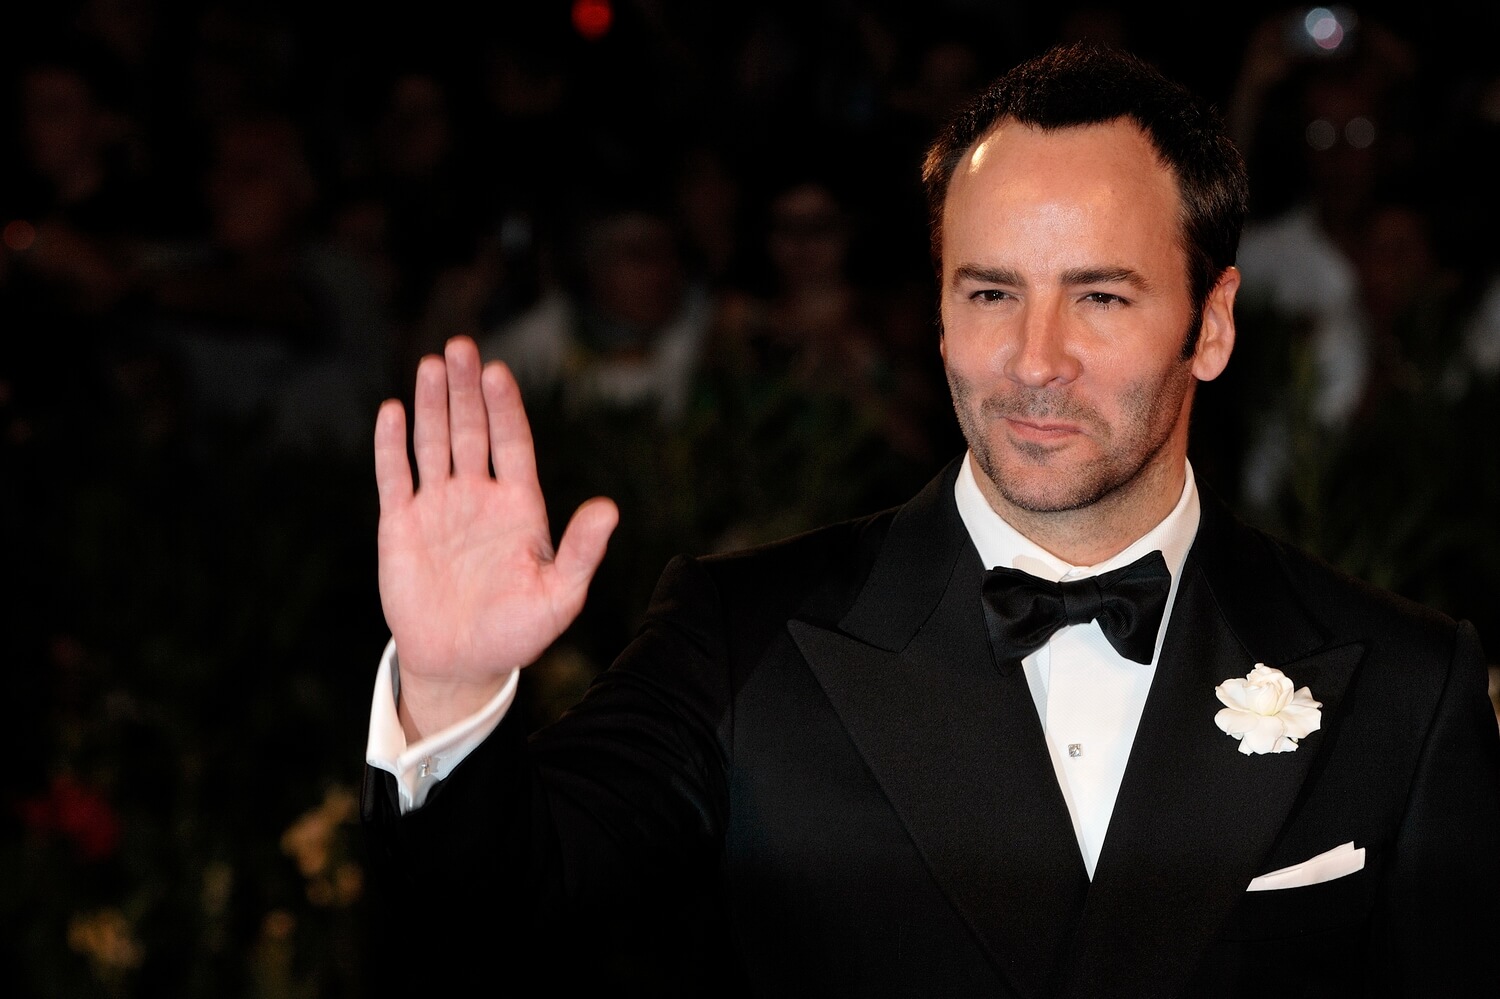 Vegan Fashion Designer Tom Ford Cuts Back on Leather and Fur in